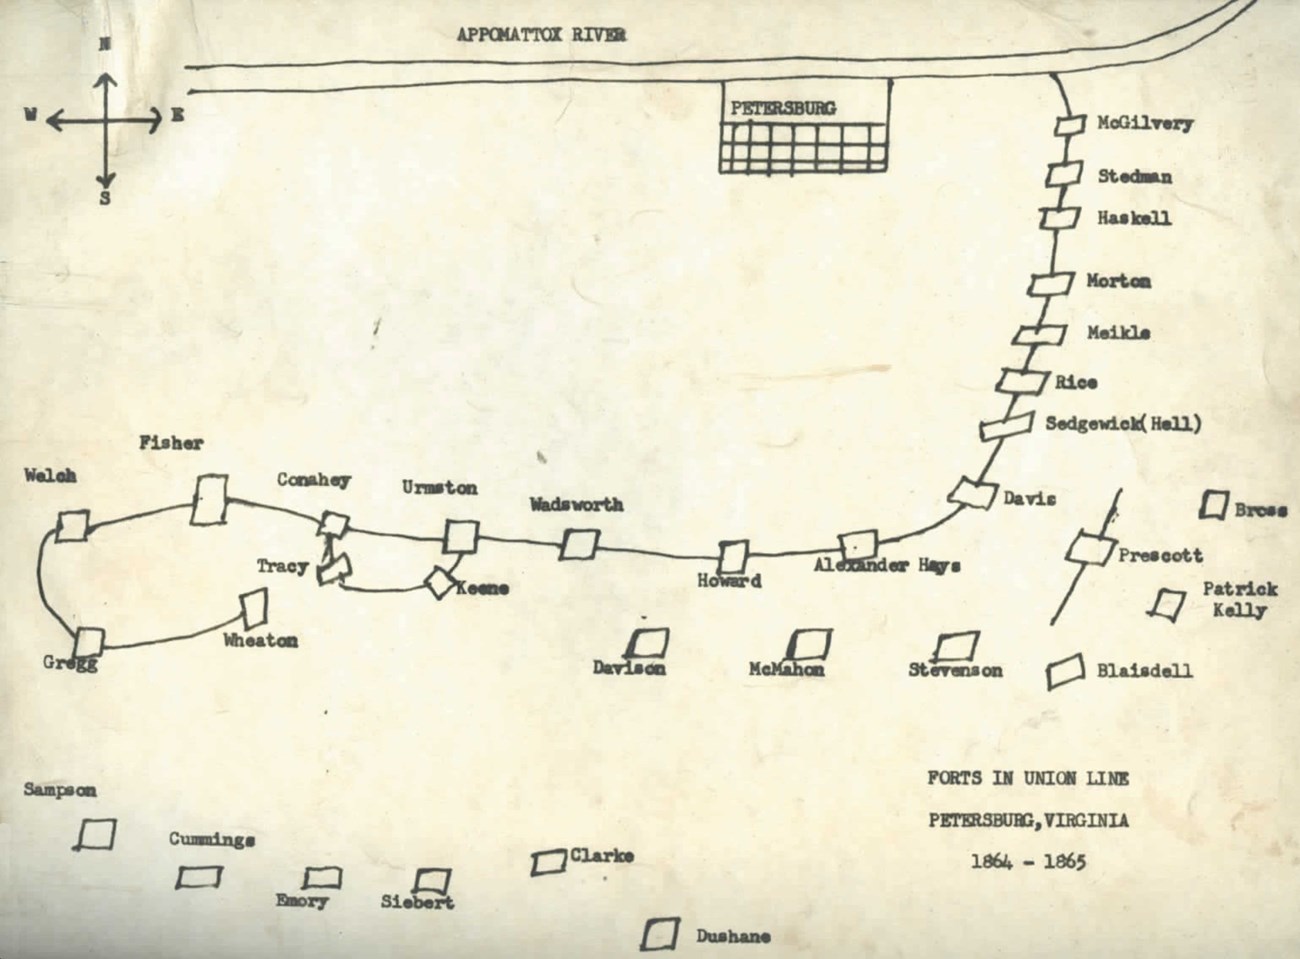 Hand drawn and typed map. The Appomattox River is across the top a line of 19 forts on the right curves across the to the center and forms a hook on the left. Fourteen forts are in support positions behind the line.